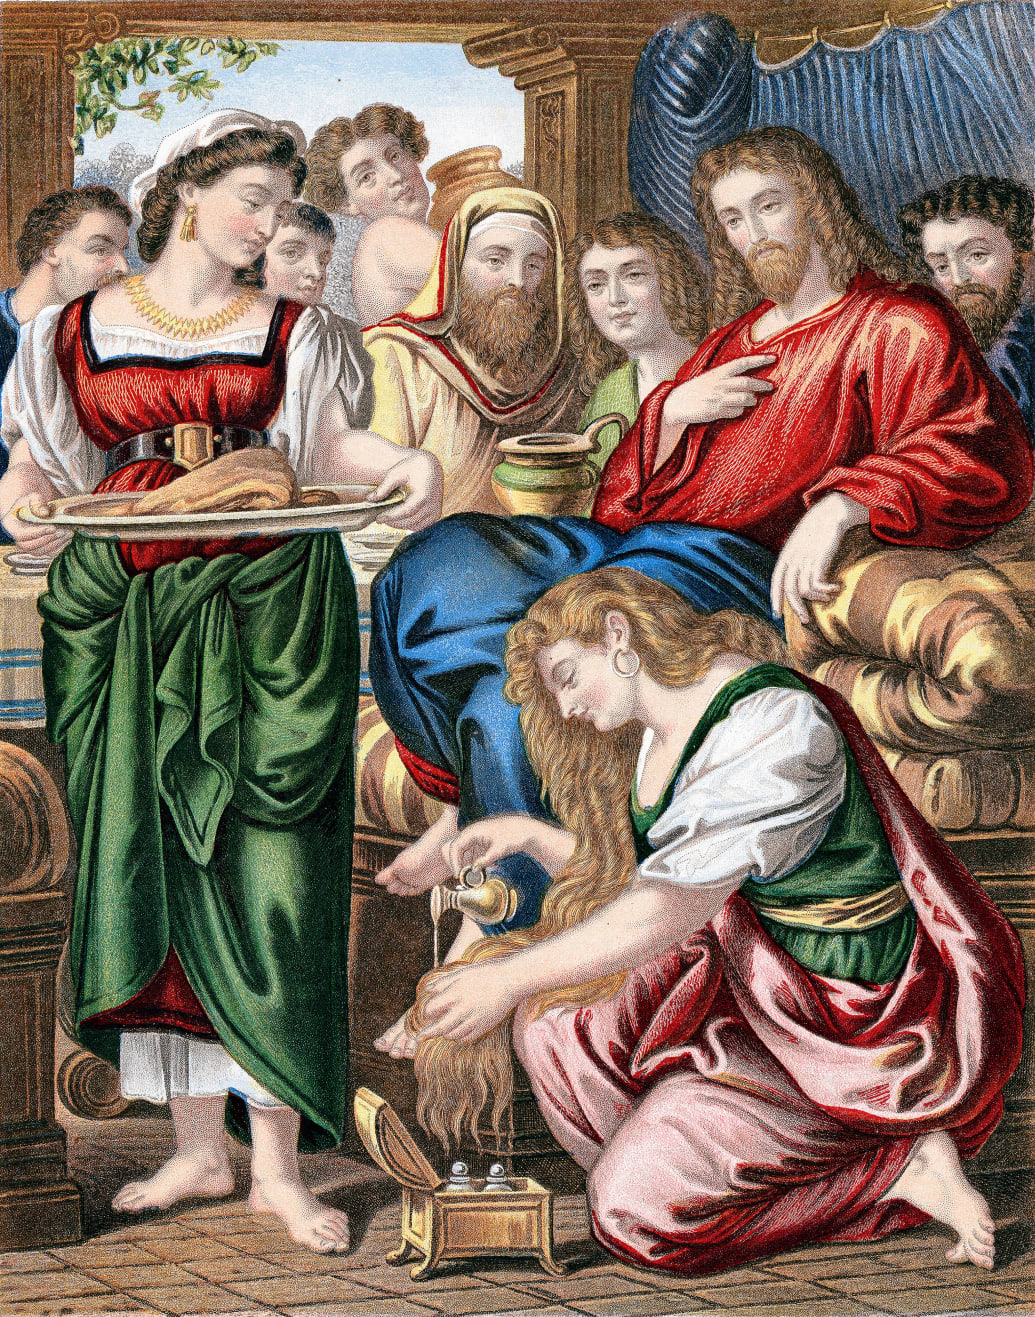 A woman, who Pope Gregory the Great, mistakenly identified as Mary Magdalene anoints the feet of Jesus.